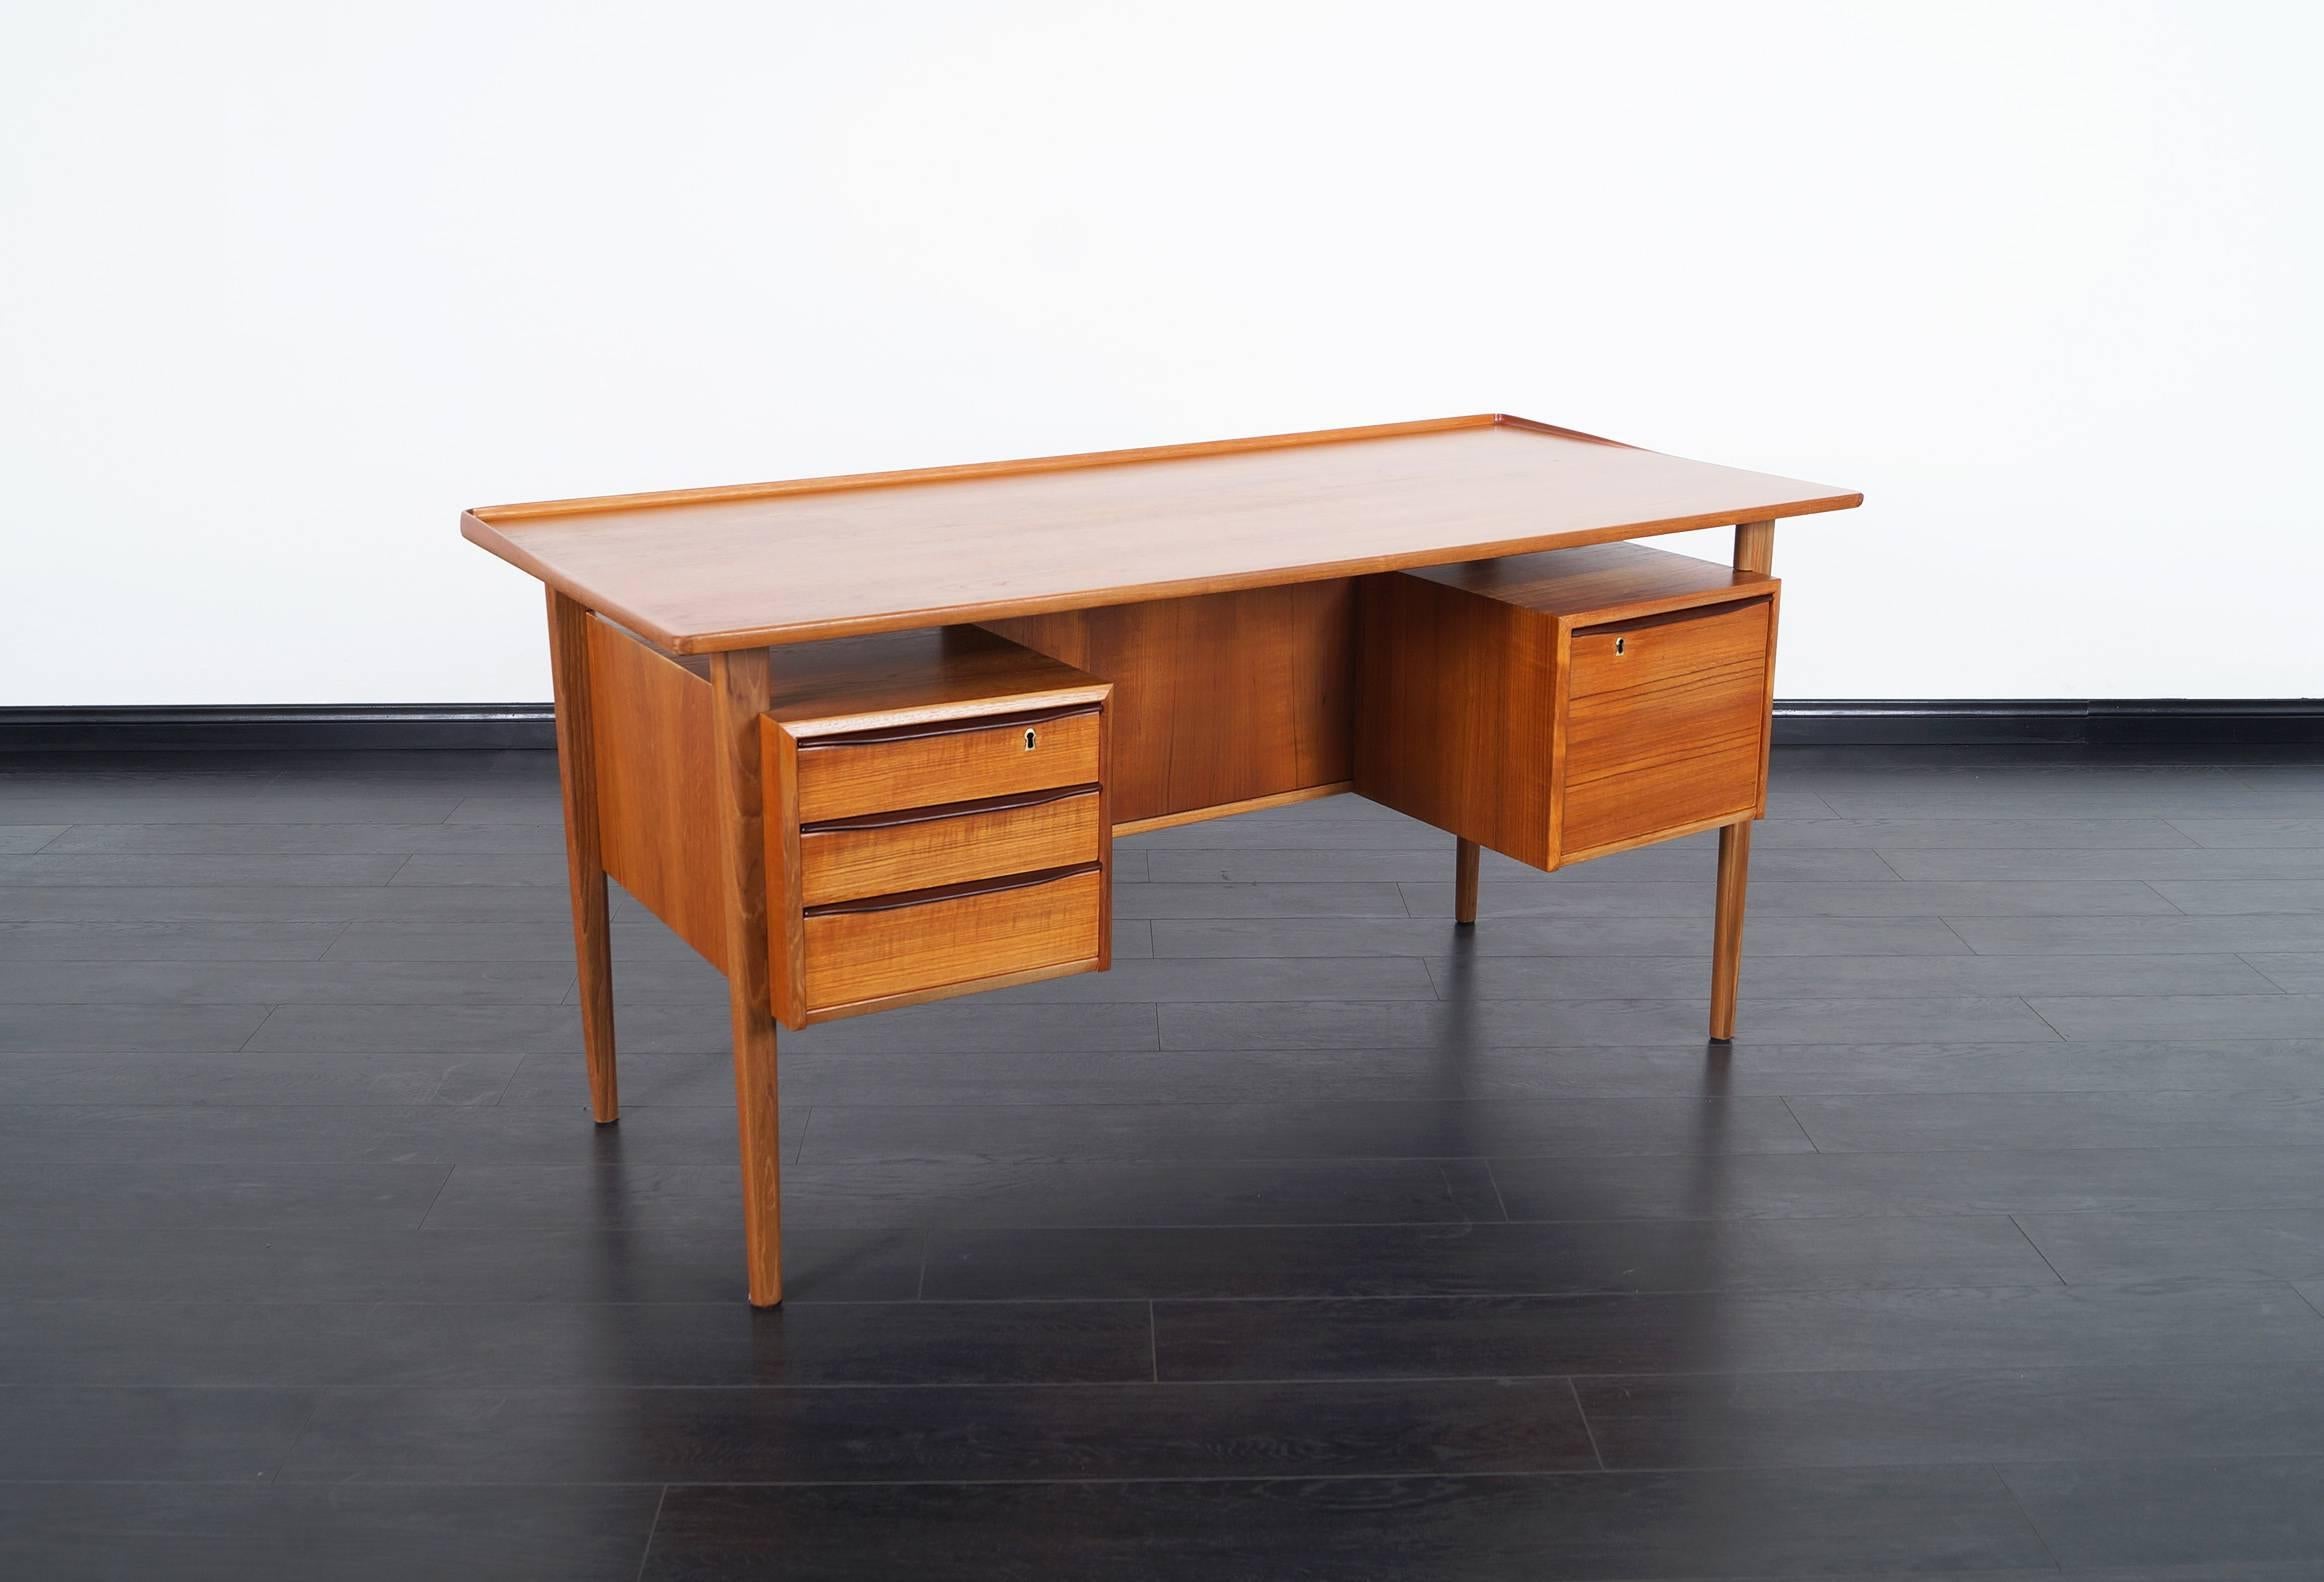 Danish modern teak desk designed by Peter Lovig Nielsen for Dansk Design. Features a floating top and integrated bookshelves on the back side. Contains three drawers and a large file drawer.